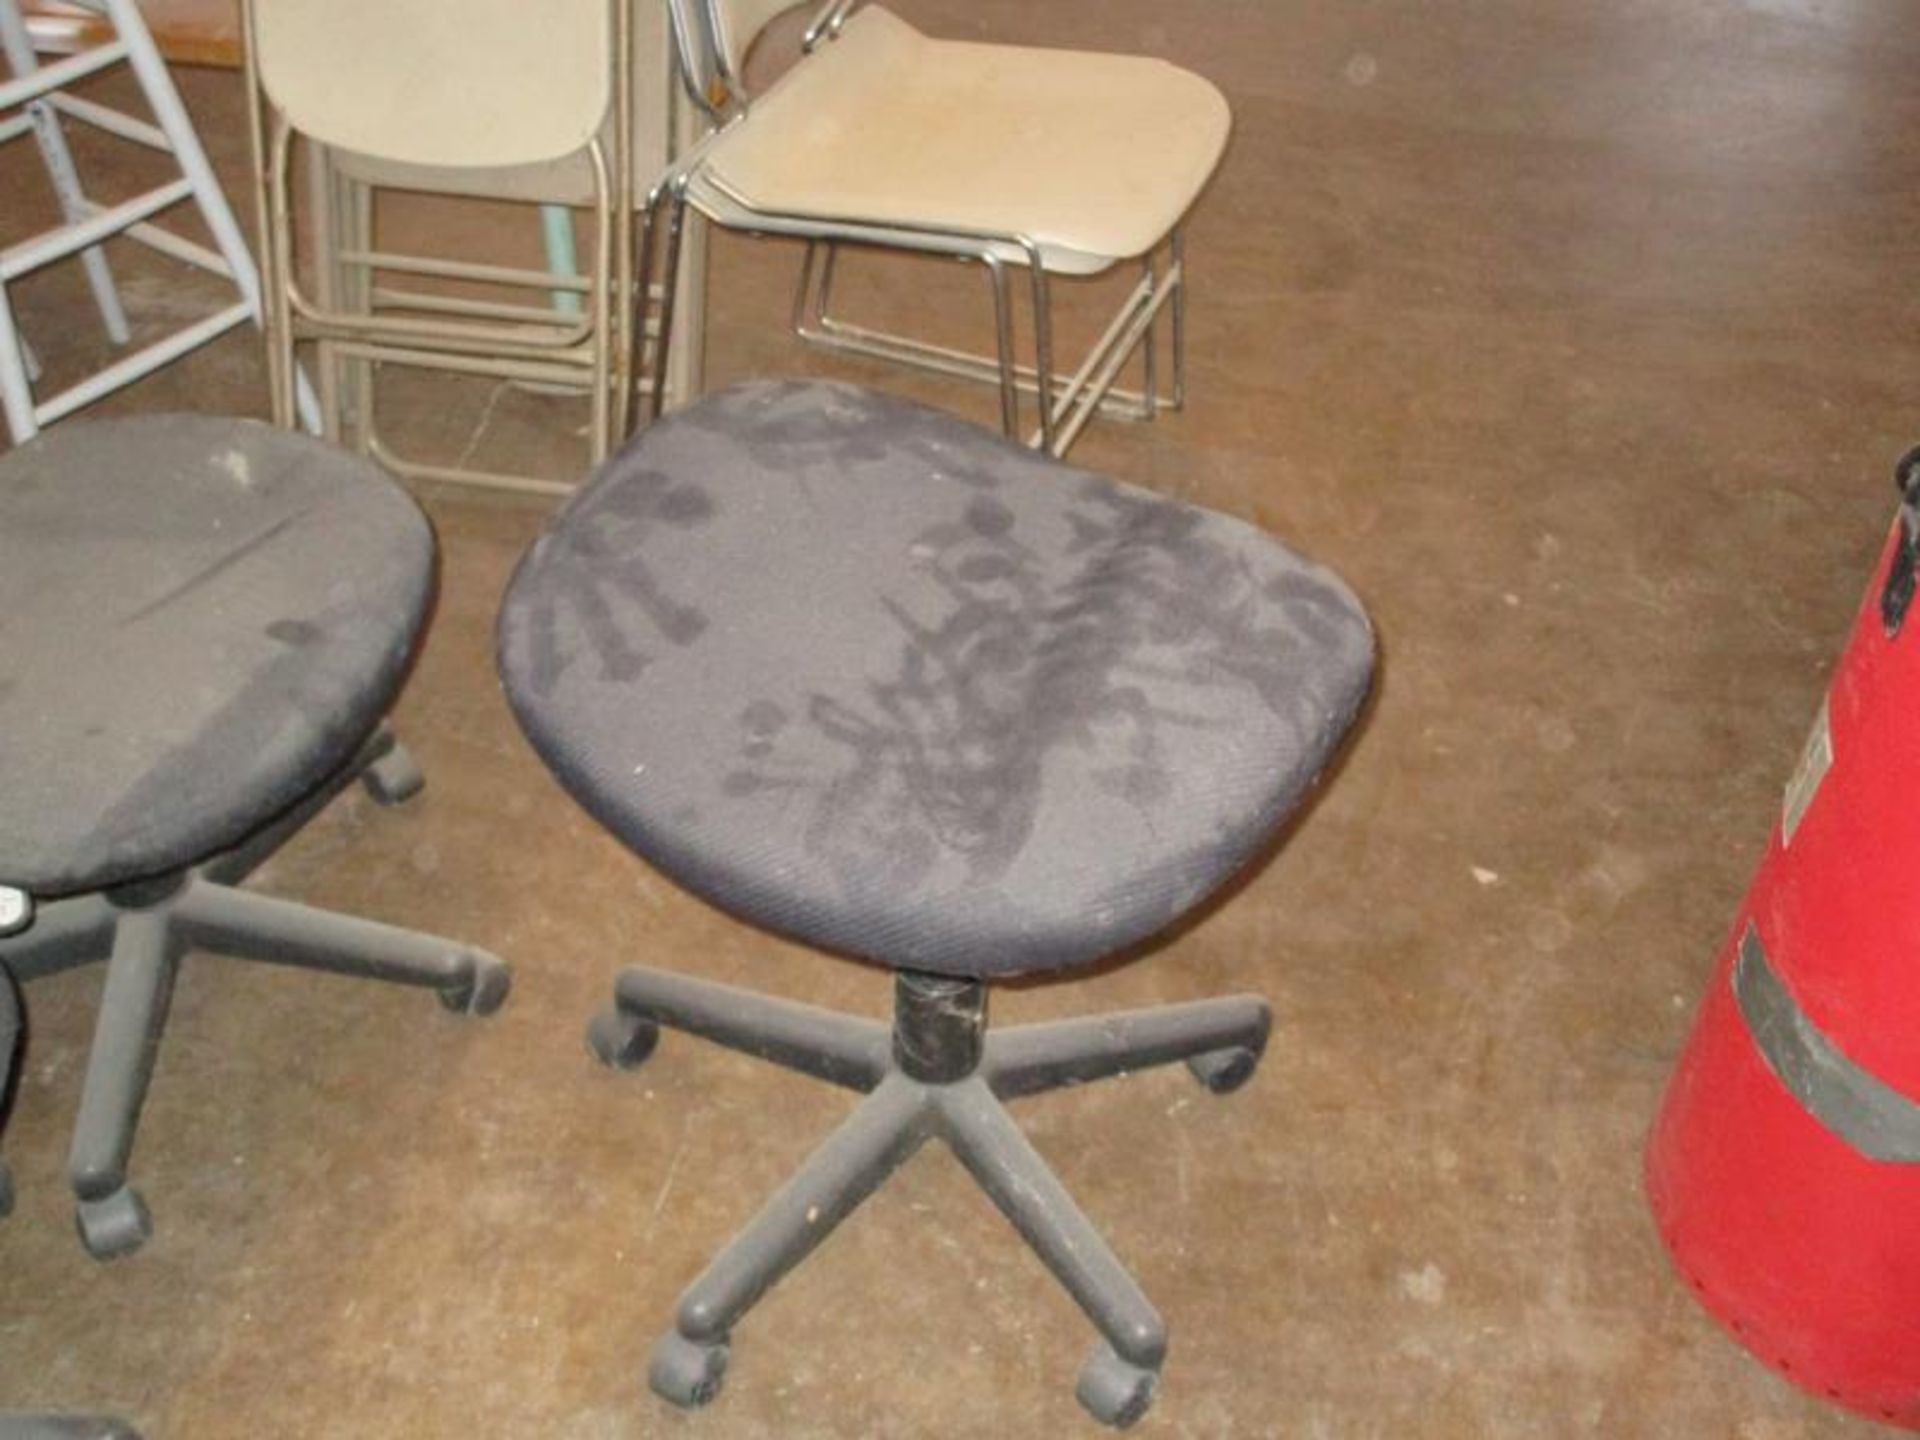 (10) Assorted Office Chairs on Casters, Fabric Seat / Back - 1 w/ Broken Back, (1) Rolling Stool - Image 10 of 14